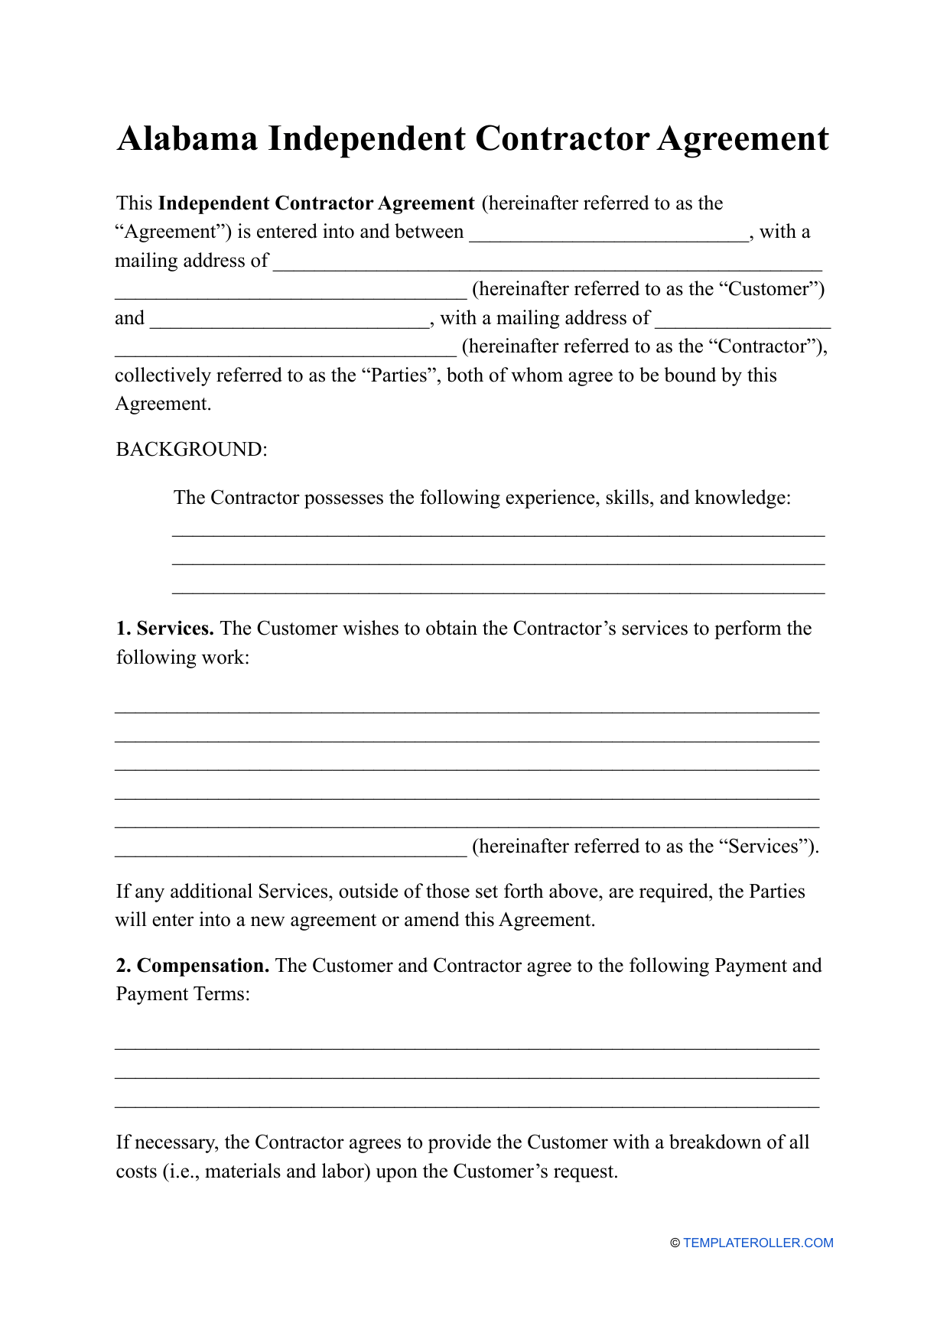 Independent Contractor Agreement Template - Alabama, Page 1